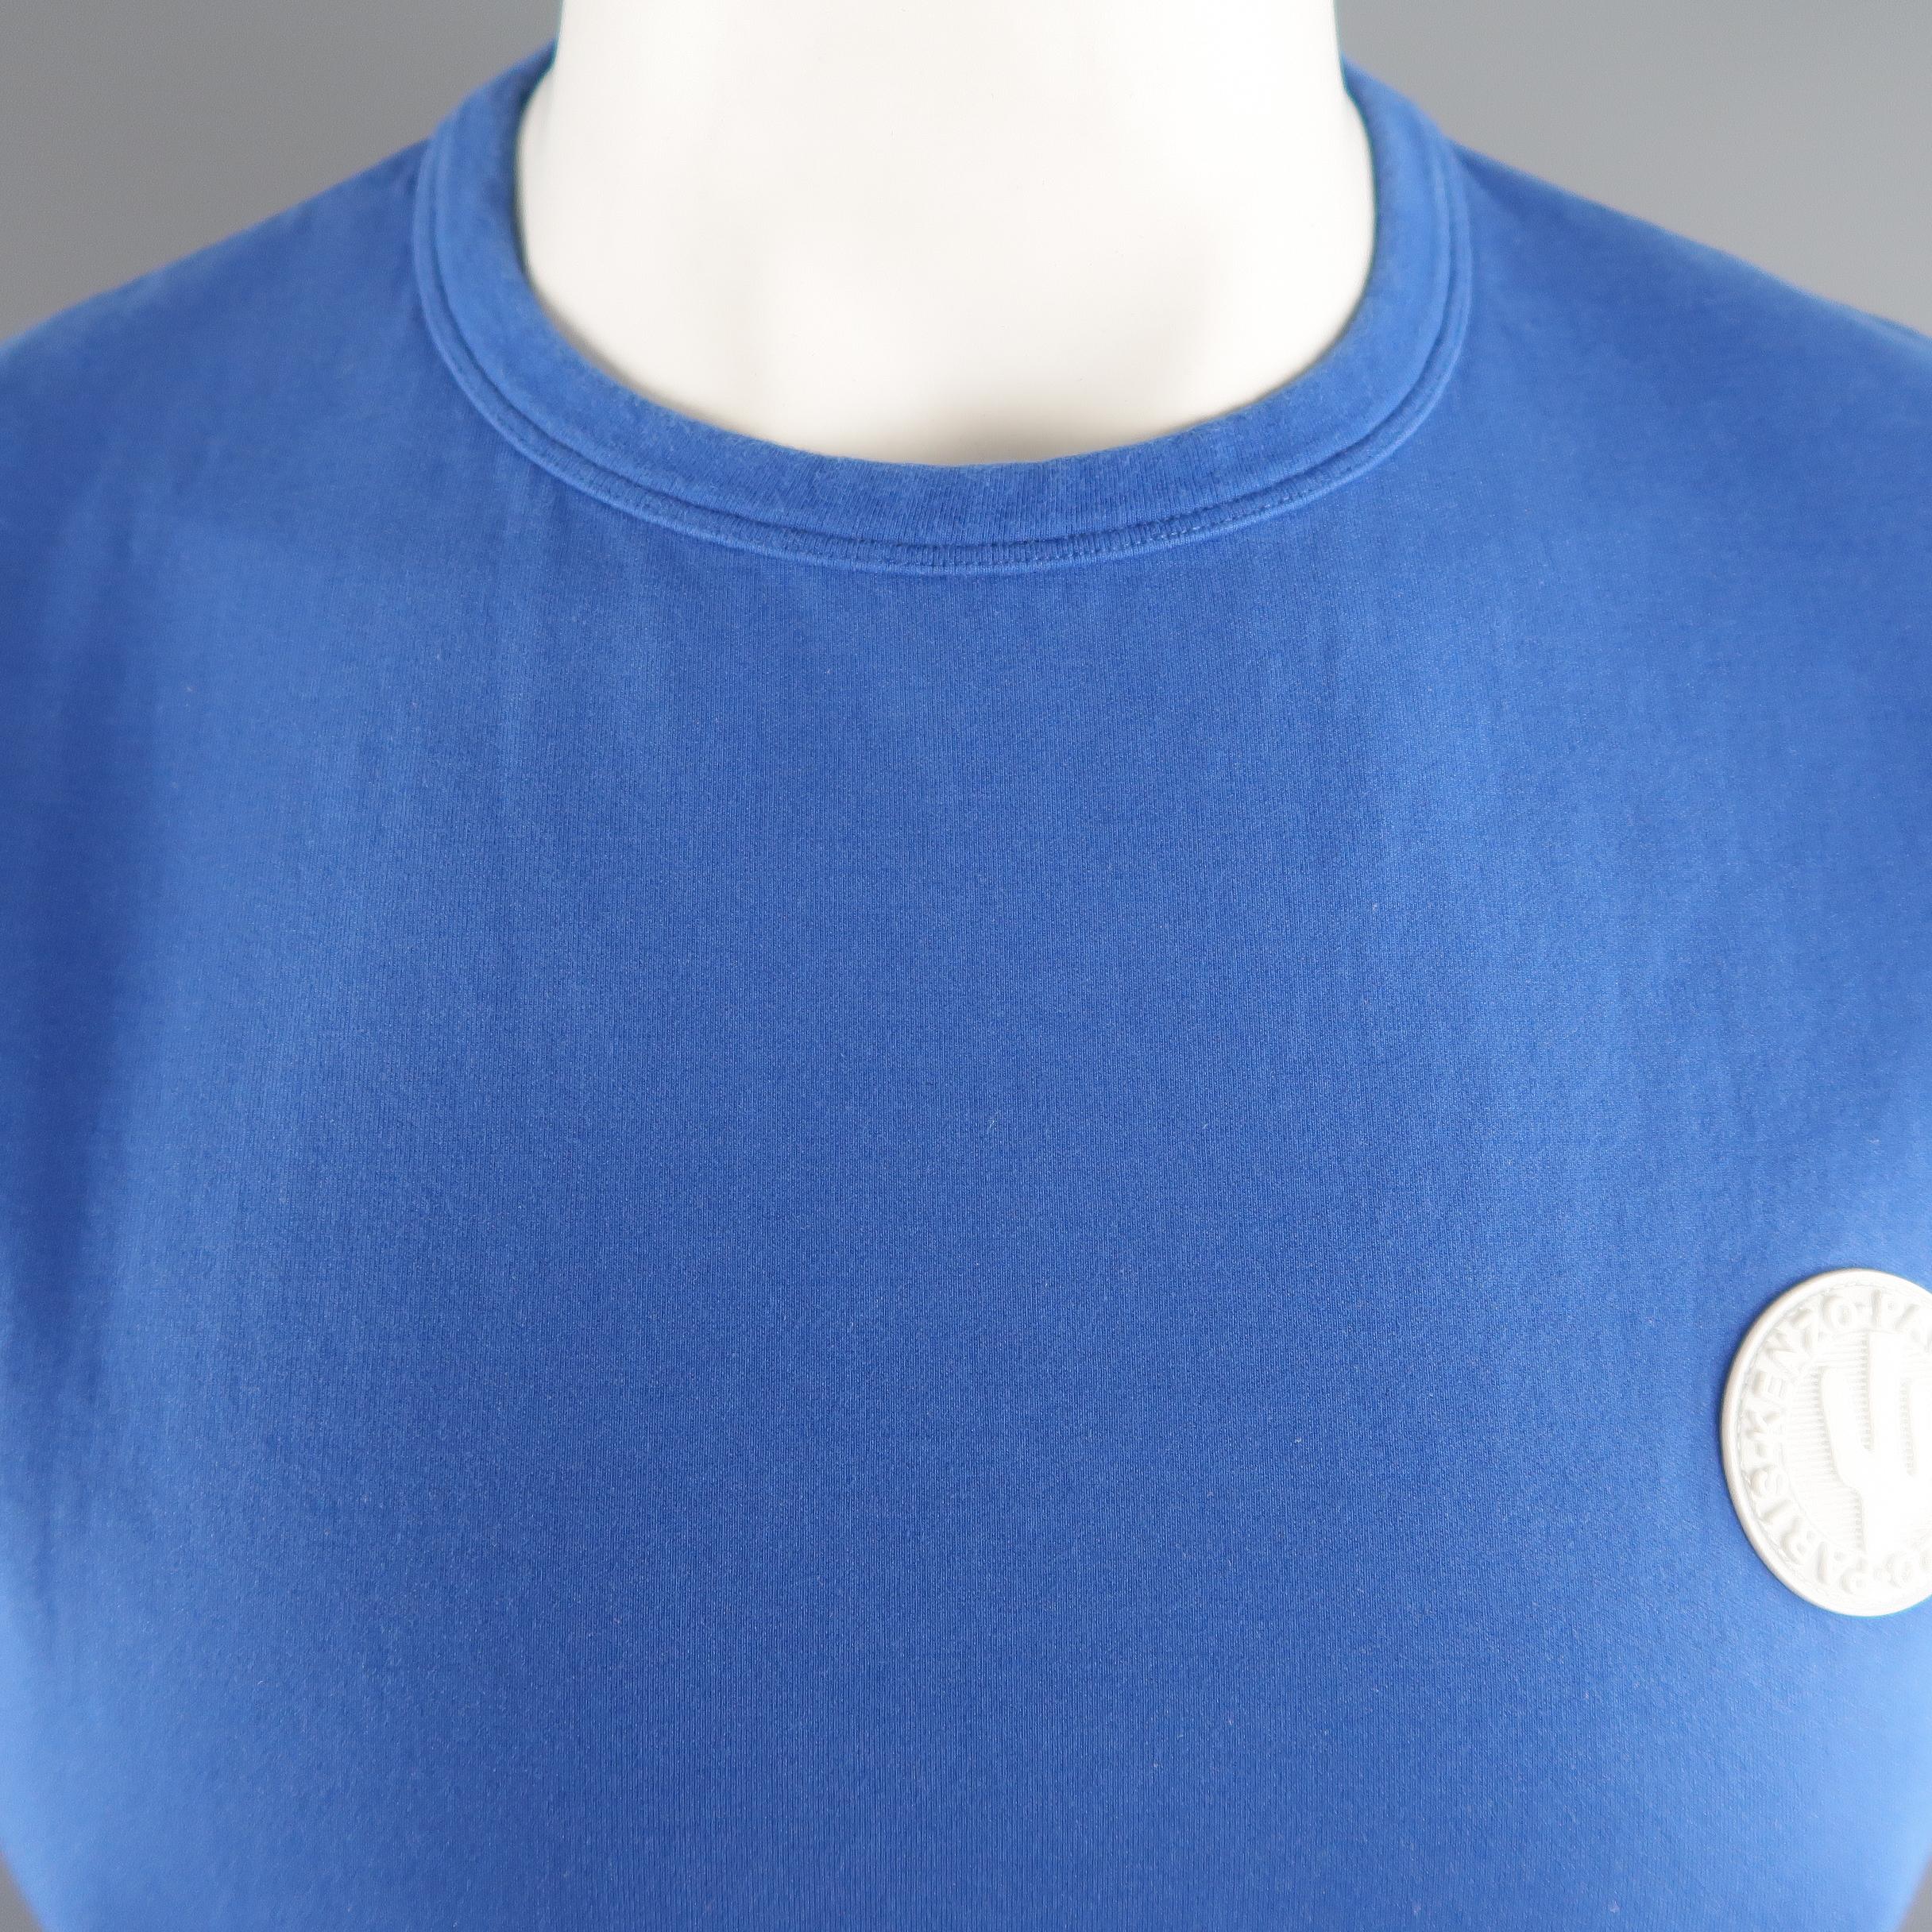 KENZO T-shirt comes in blue solid tone in cotton / spandex material, with a white logo patch and a crewneck. Minor wear.
 
Good Pre-Owned Condition.
Marked: M
 
Measurements:
 
Shoulder:  17.5  in.
Chest:  43  in.
Sleeve: 9.5  in.
Length:  26.5   in.